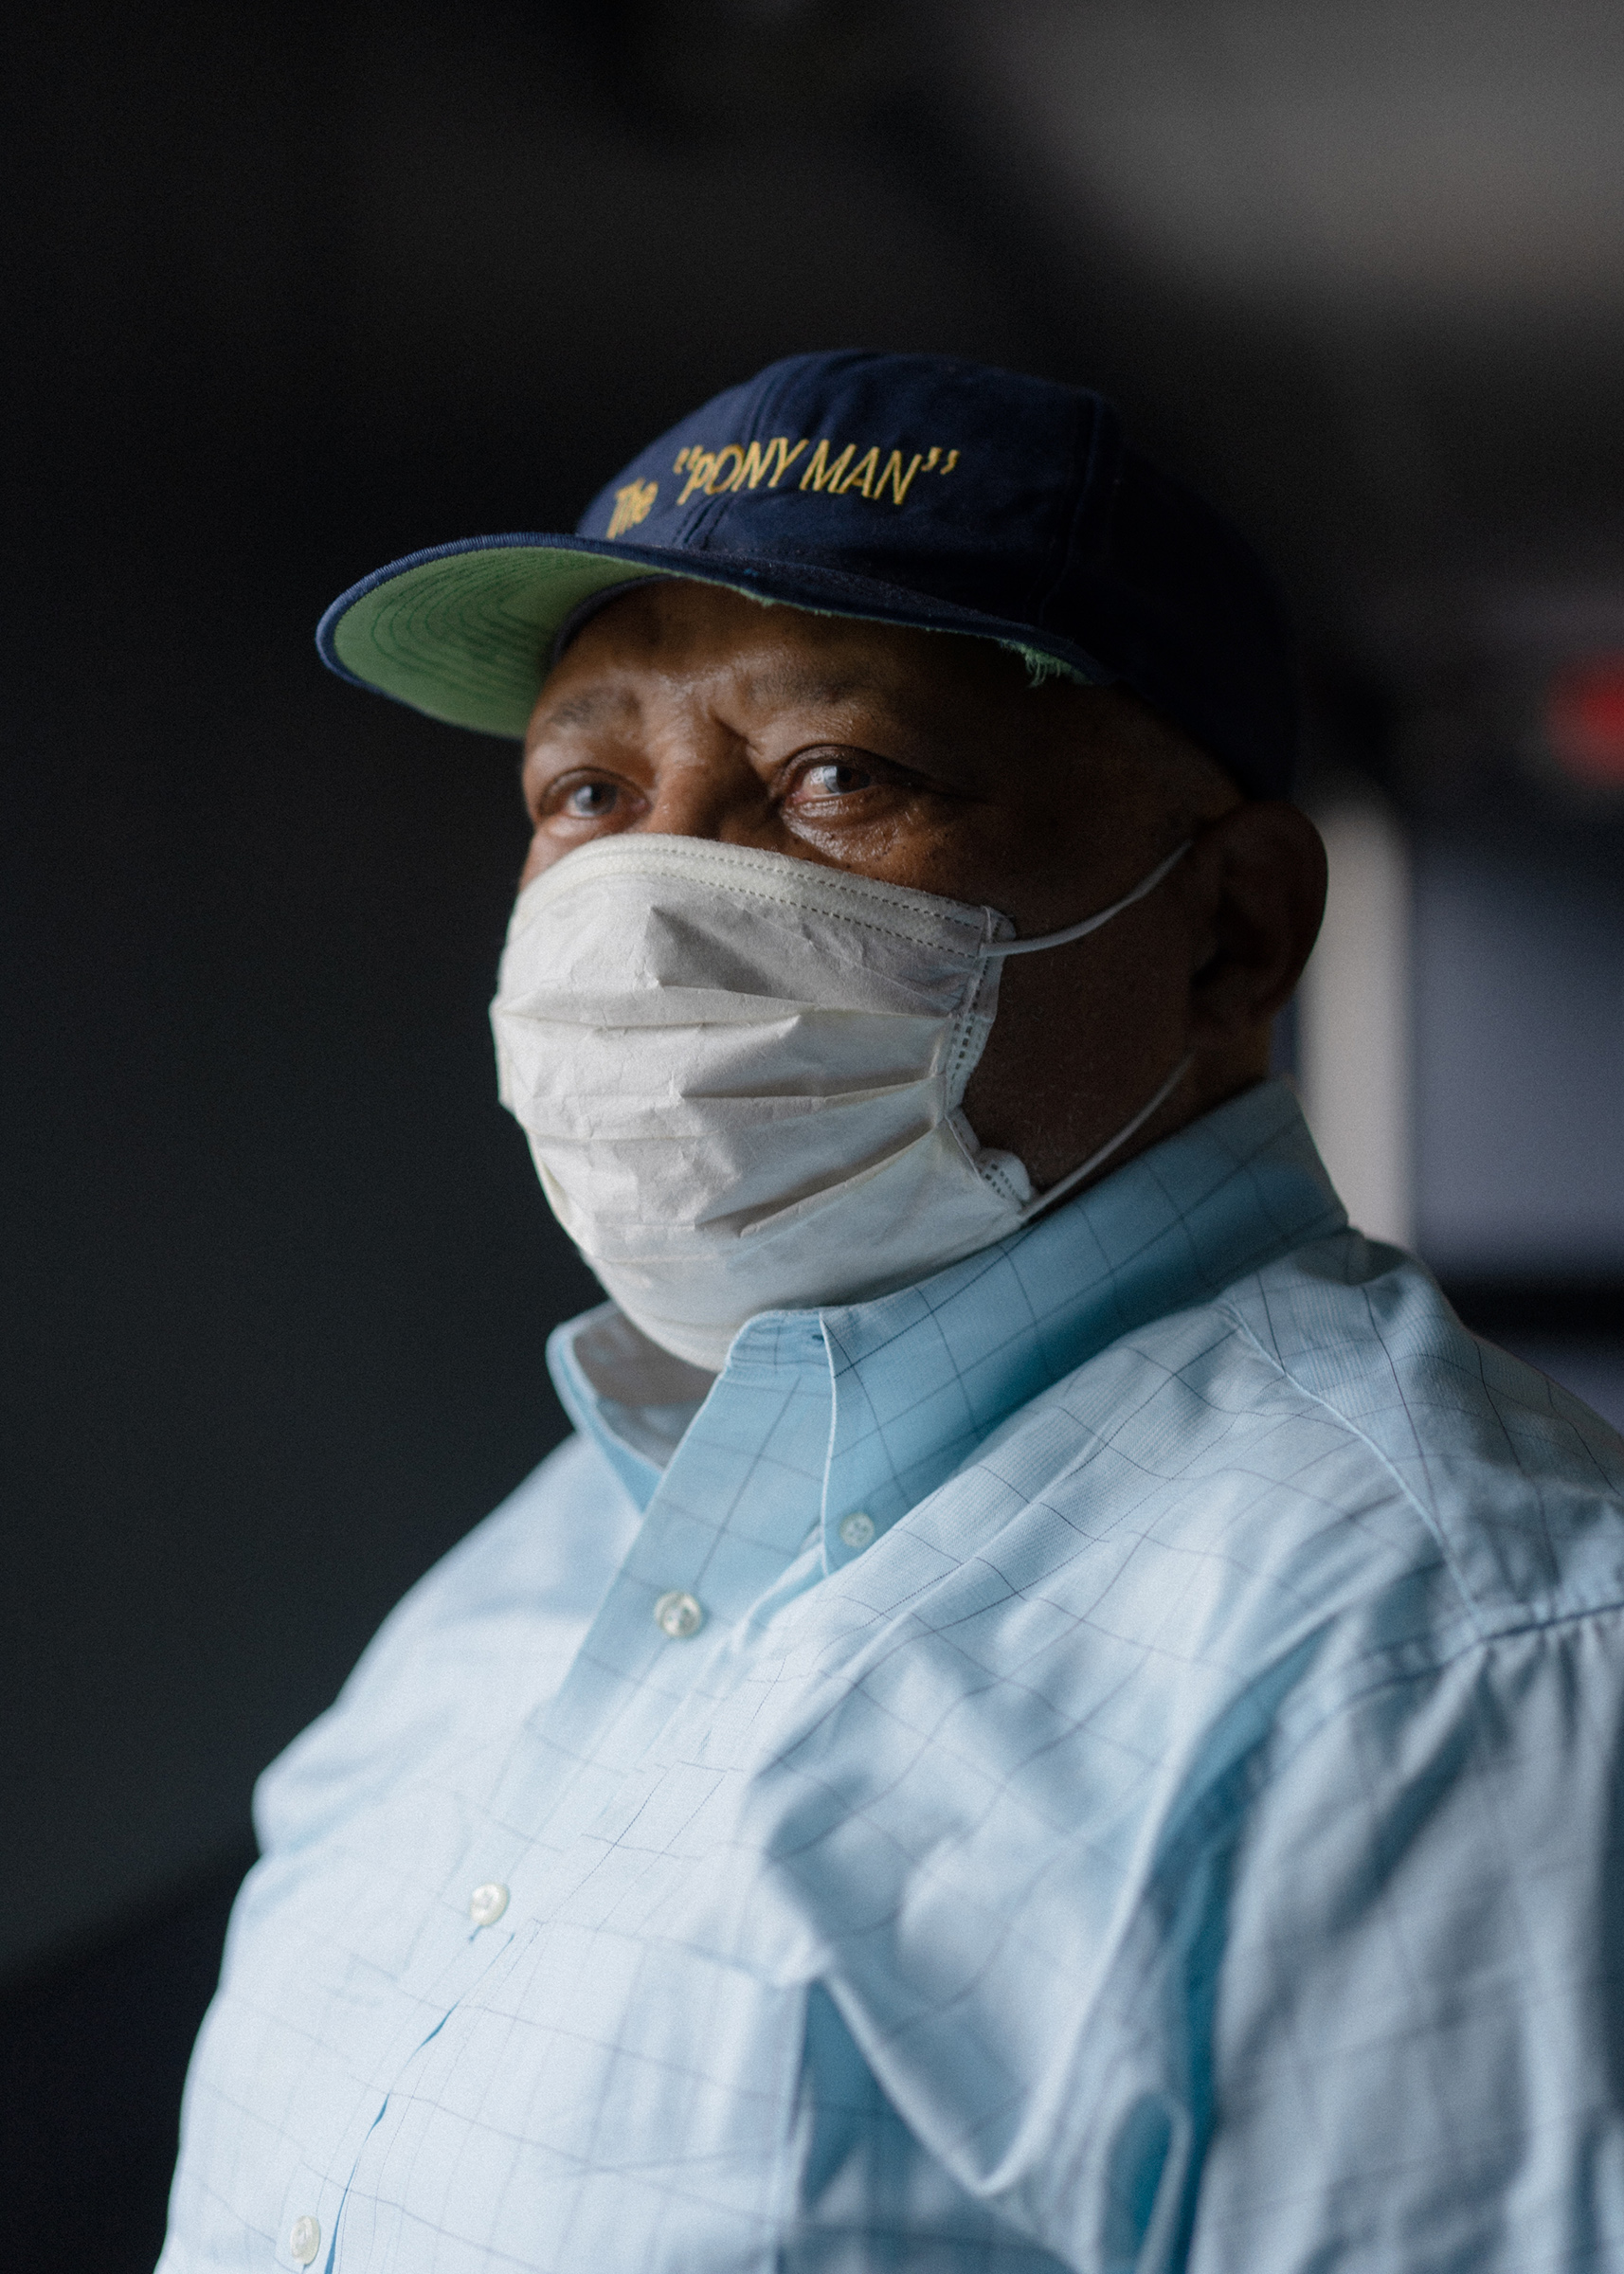 Retired sanitation worker Maurice "Pony Man" Queen, 72, stands in the hallway at the Department of Public Works Solid Waste Collections Division on May 22. (Nate Palmer for TIME)